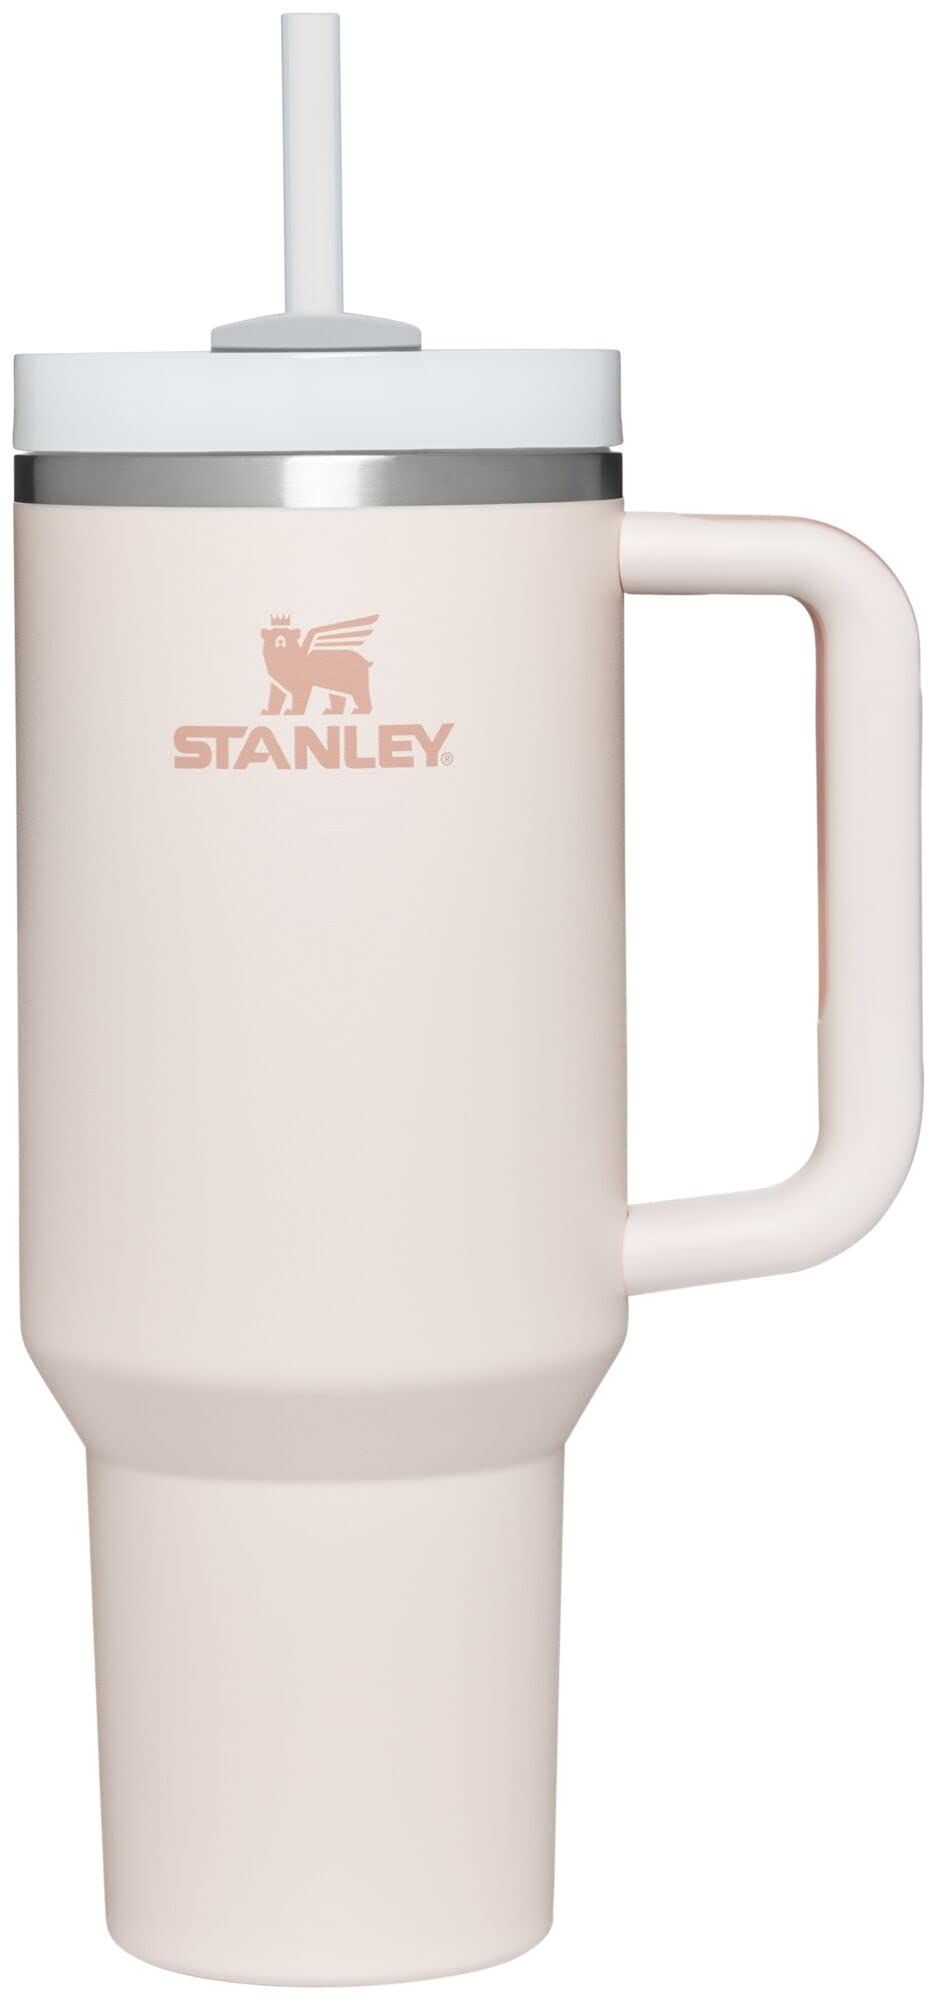 Target's Version of the Stanley Cup Might Be Better Than the Original